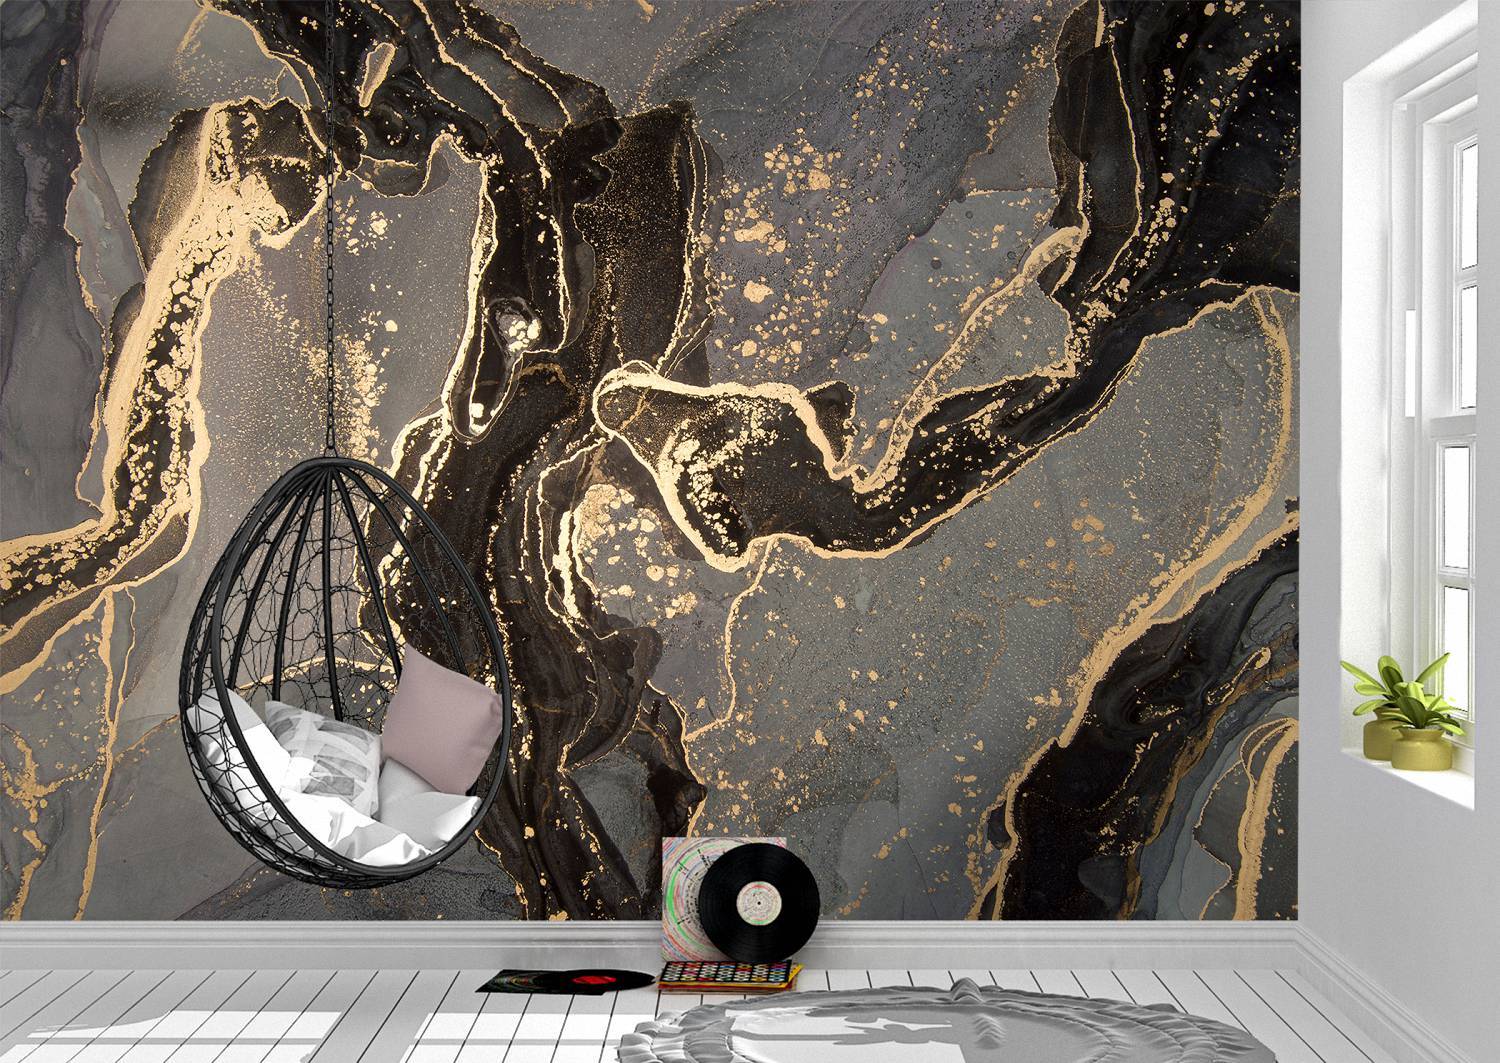 Grey & Black with Gold Marble Wall Mural Photo Wallpaper UV Print Decal Art Décor